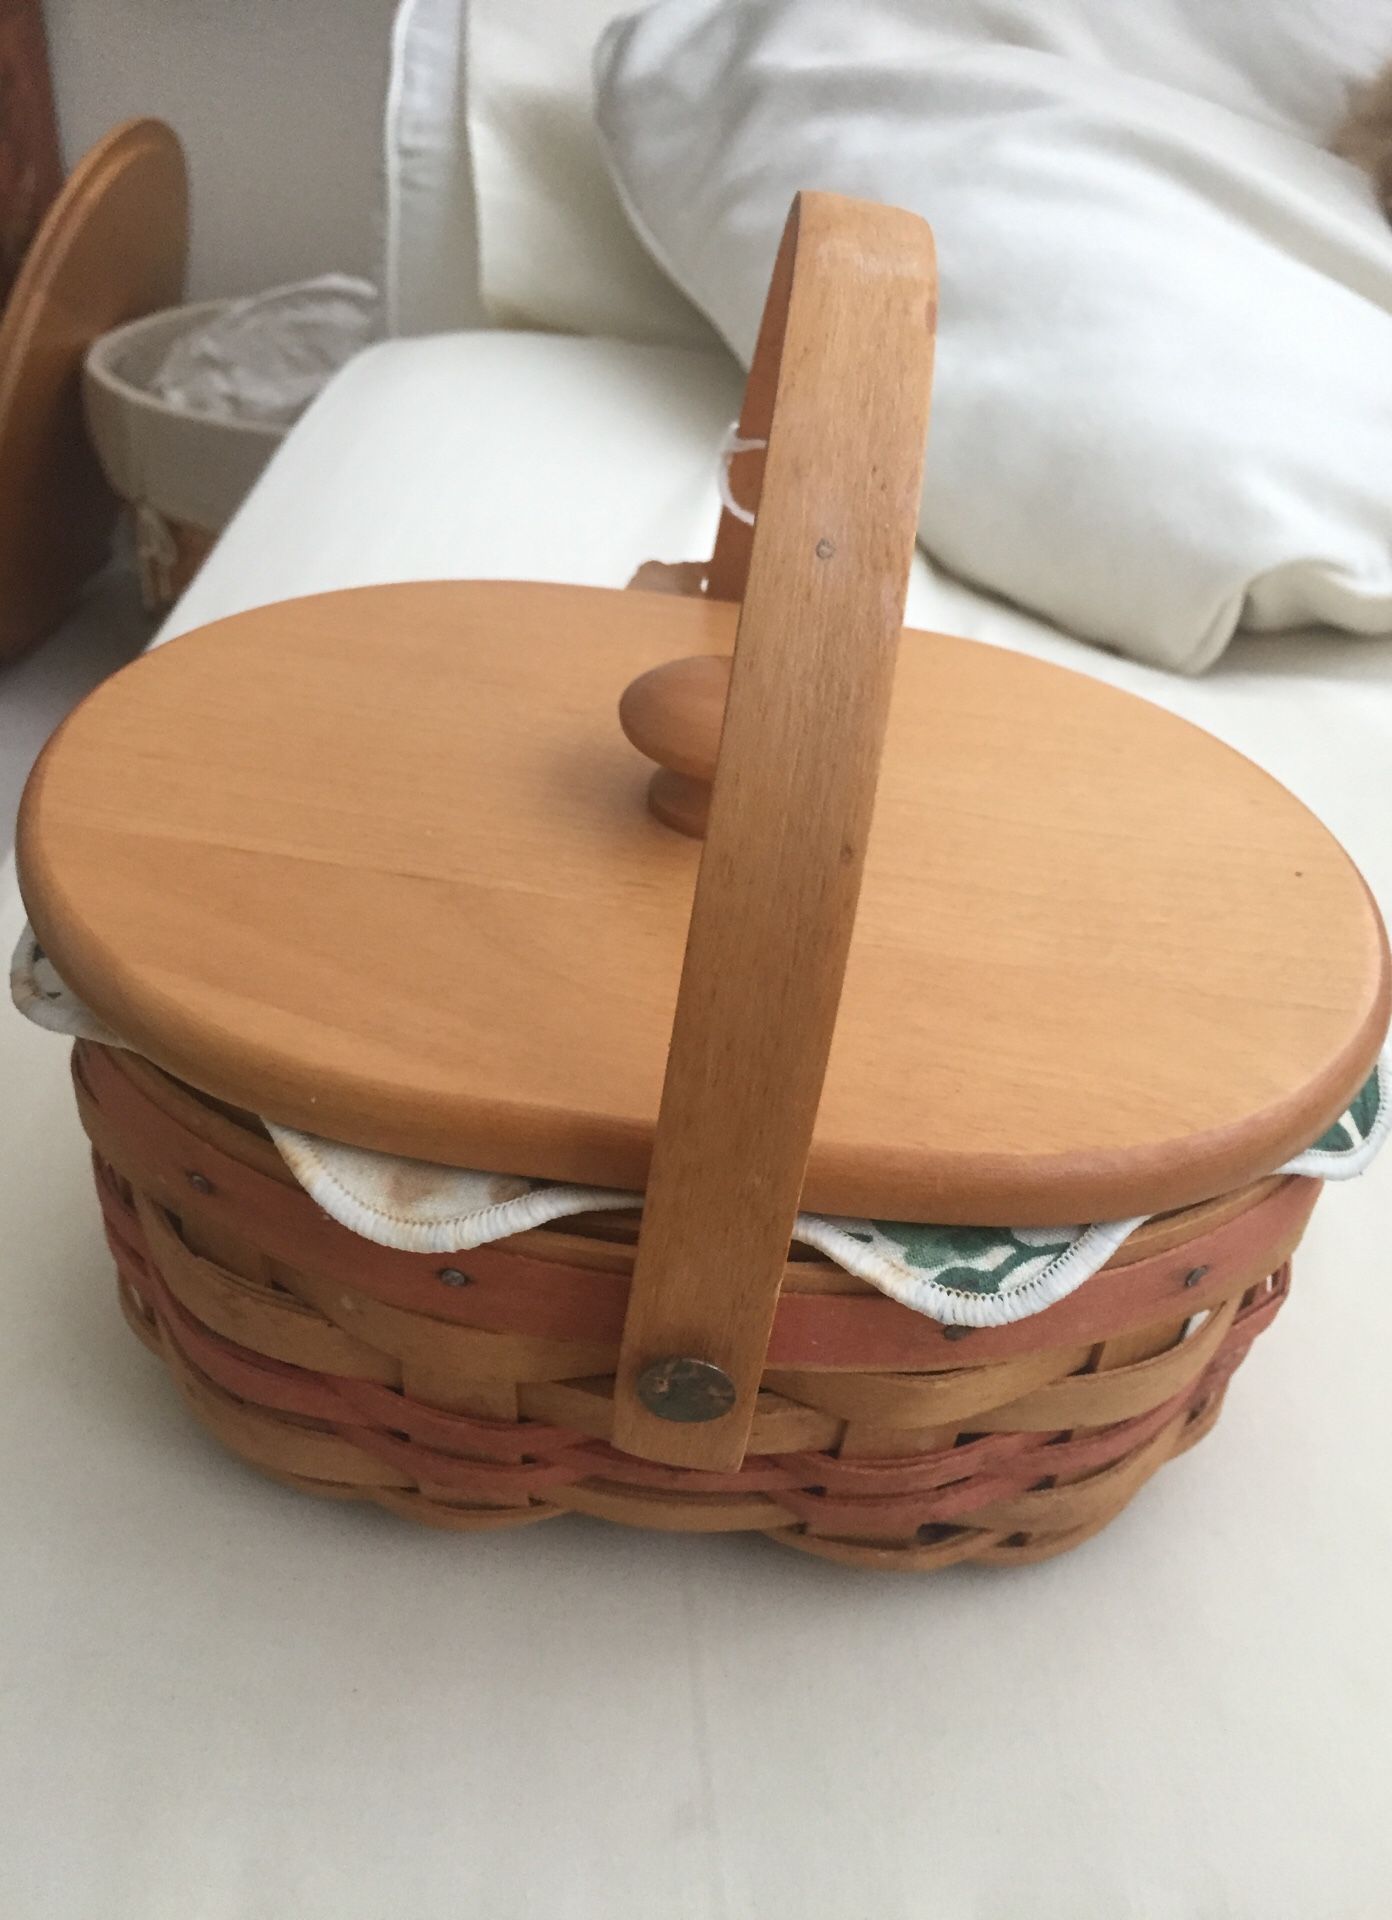 Longaberger Basket with lid in very good shape (Pompano Beach 33069